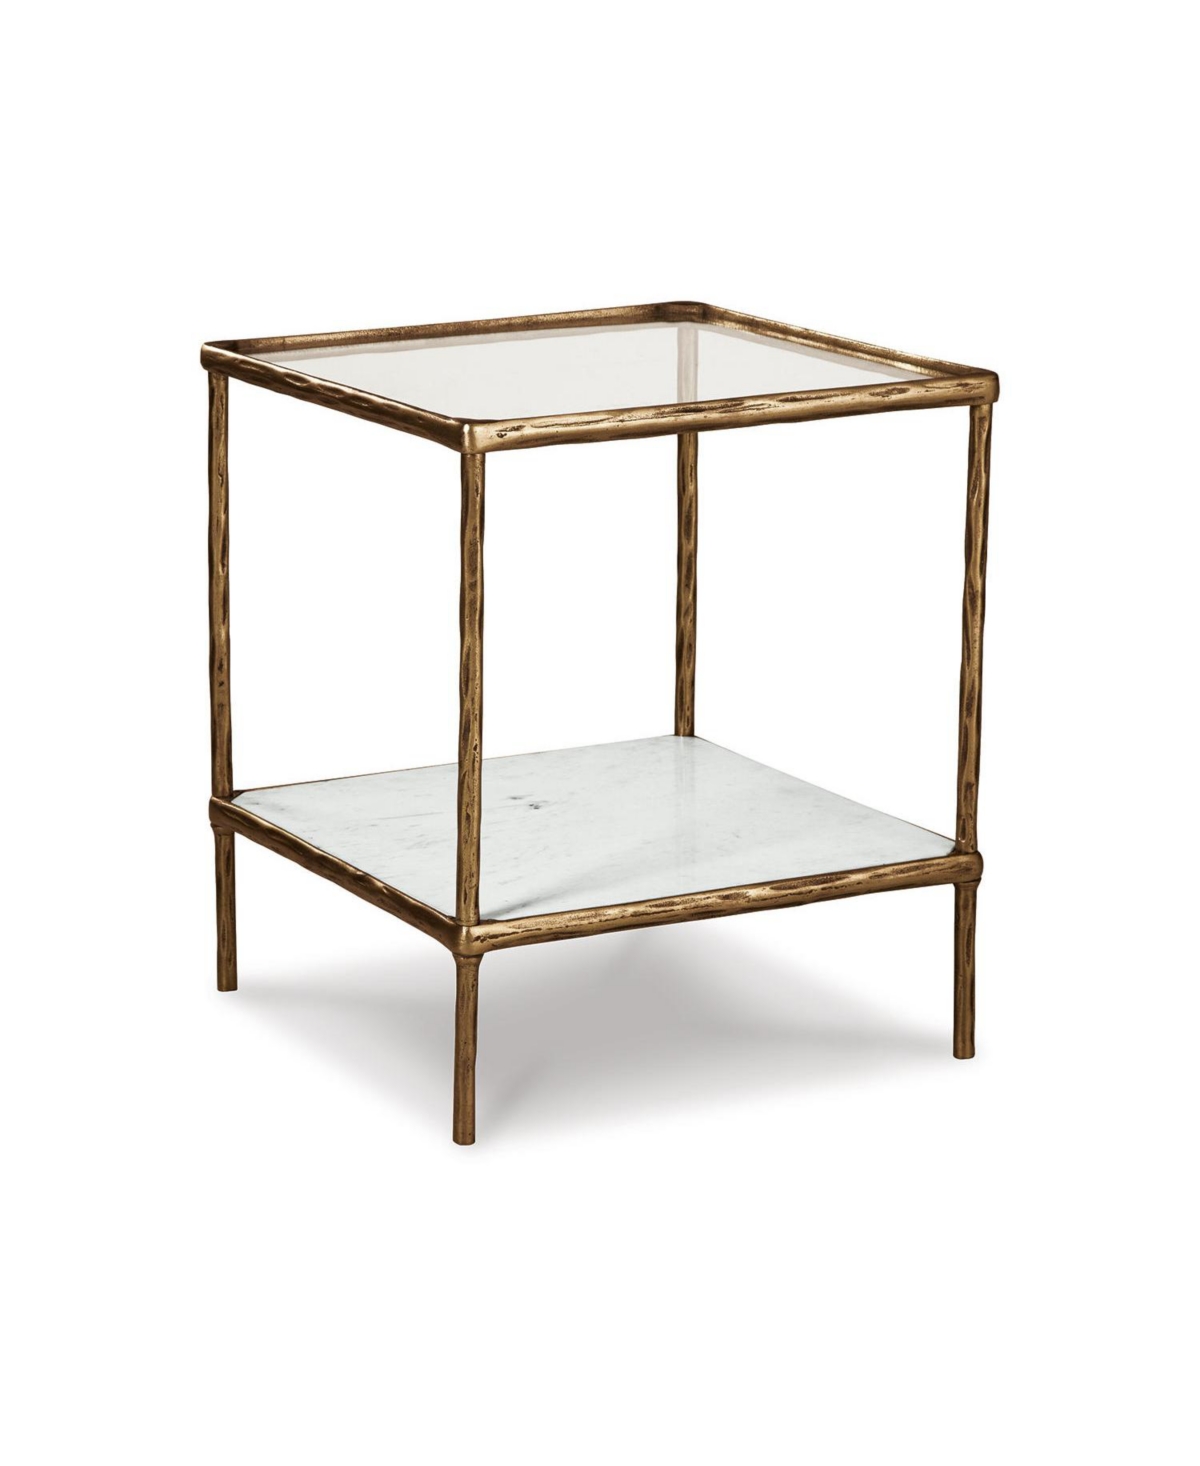 Signature Design By Ashley Ryandale Accent Table In Antique Brass Finish